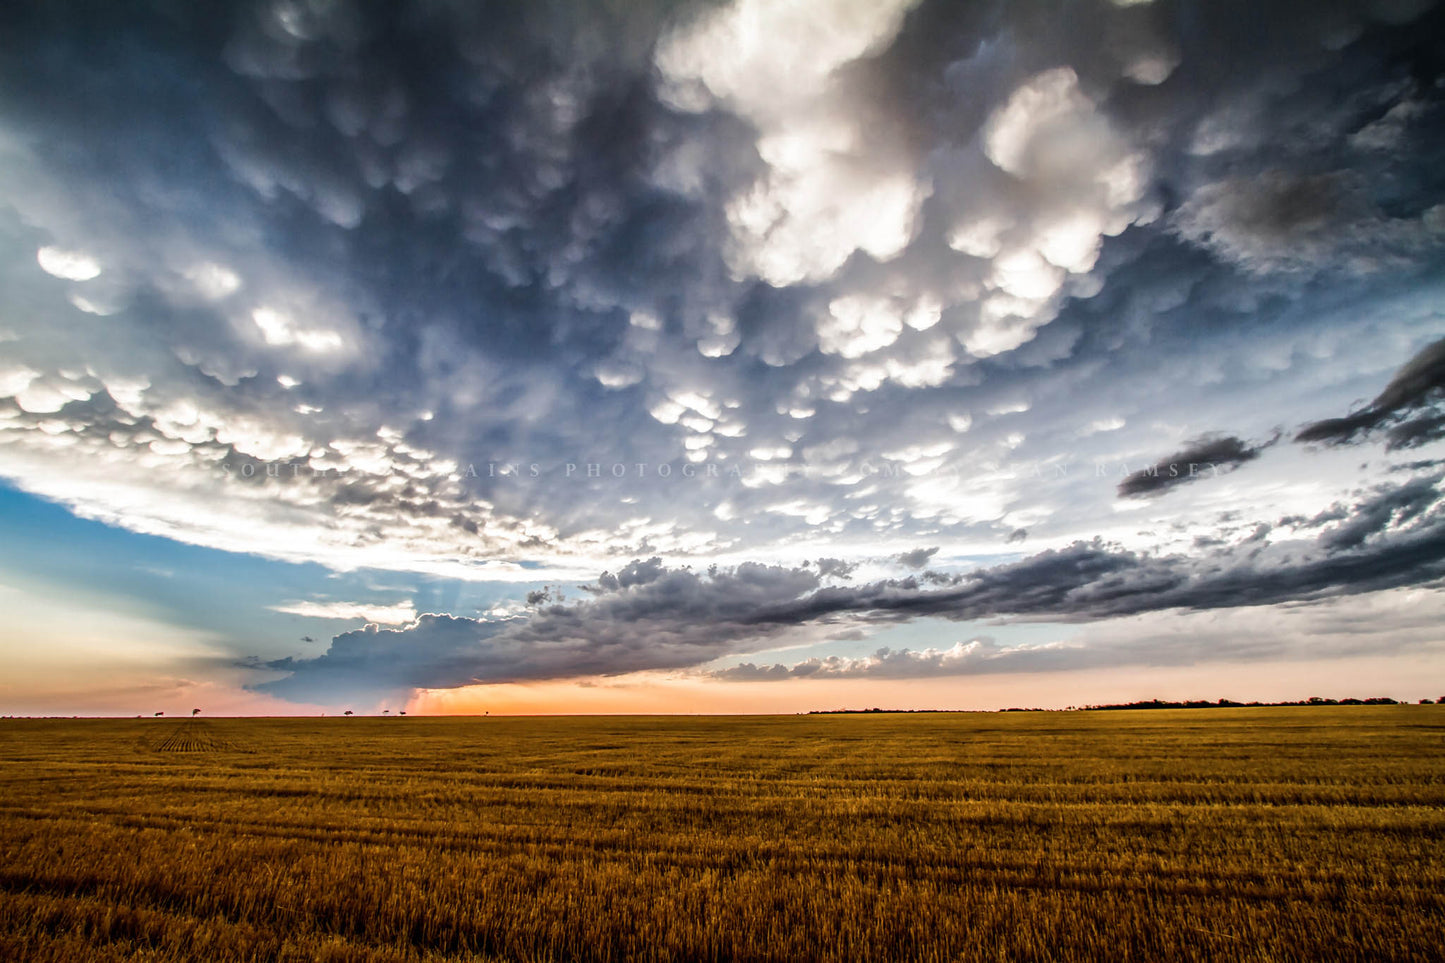 Western photography print of a scenic sky full of storm clouds over a field after a stormy day on the plains of Texas by Sean Ramsey of Southern Plains Photography.